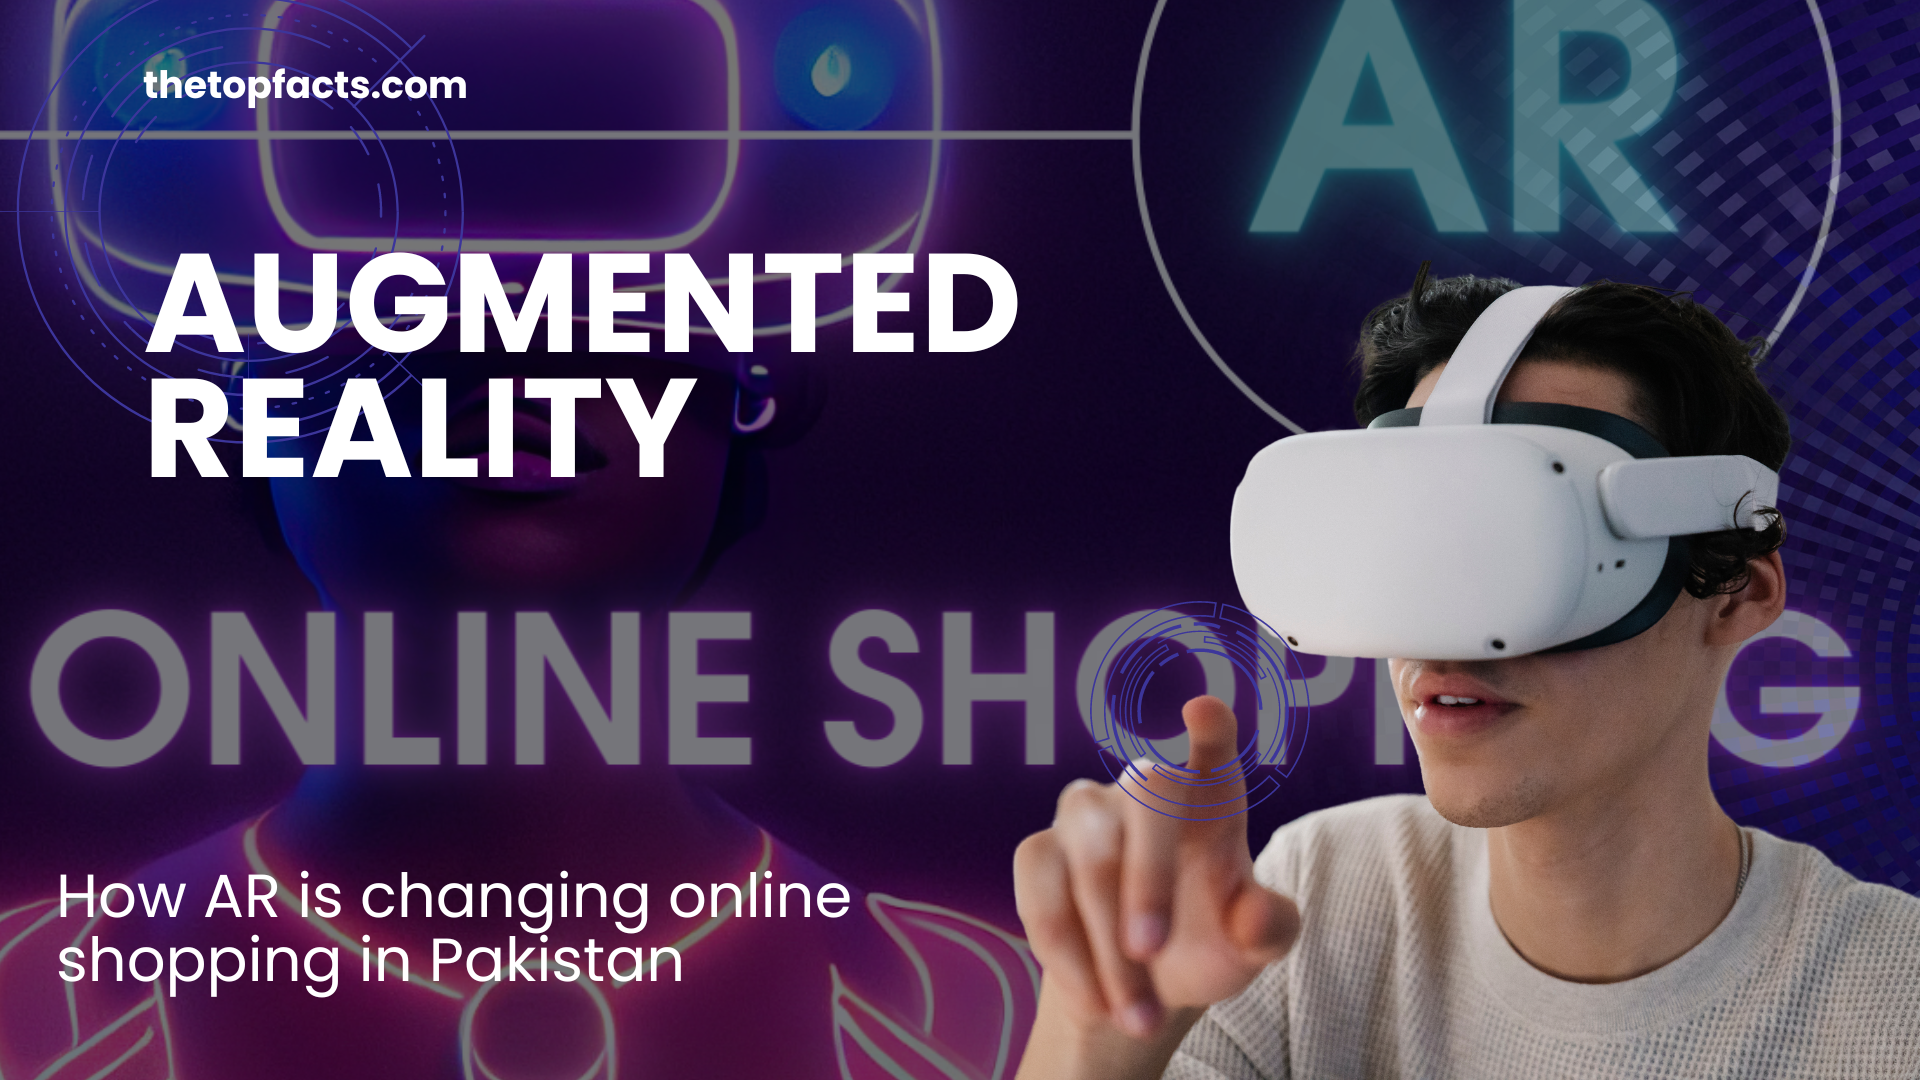 Online Shopping in Pakistan is being changed by Augmented Reality